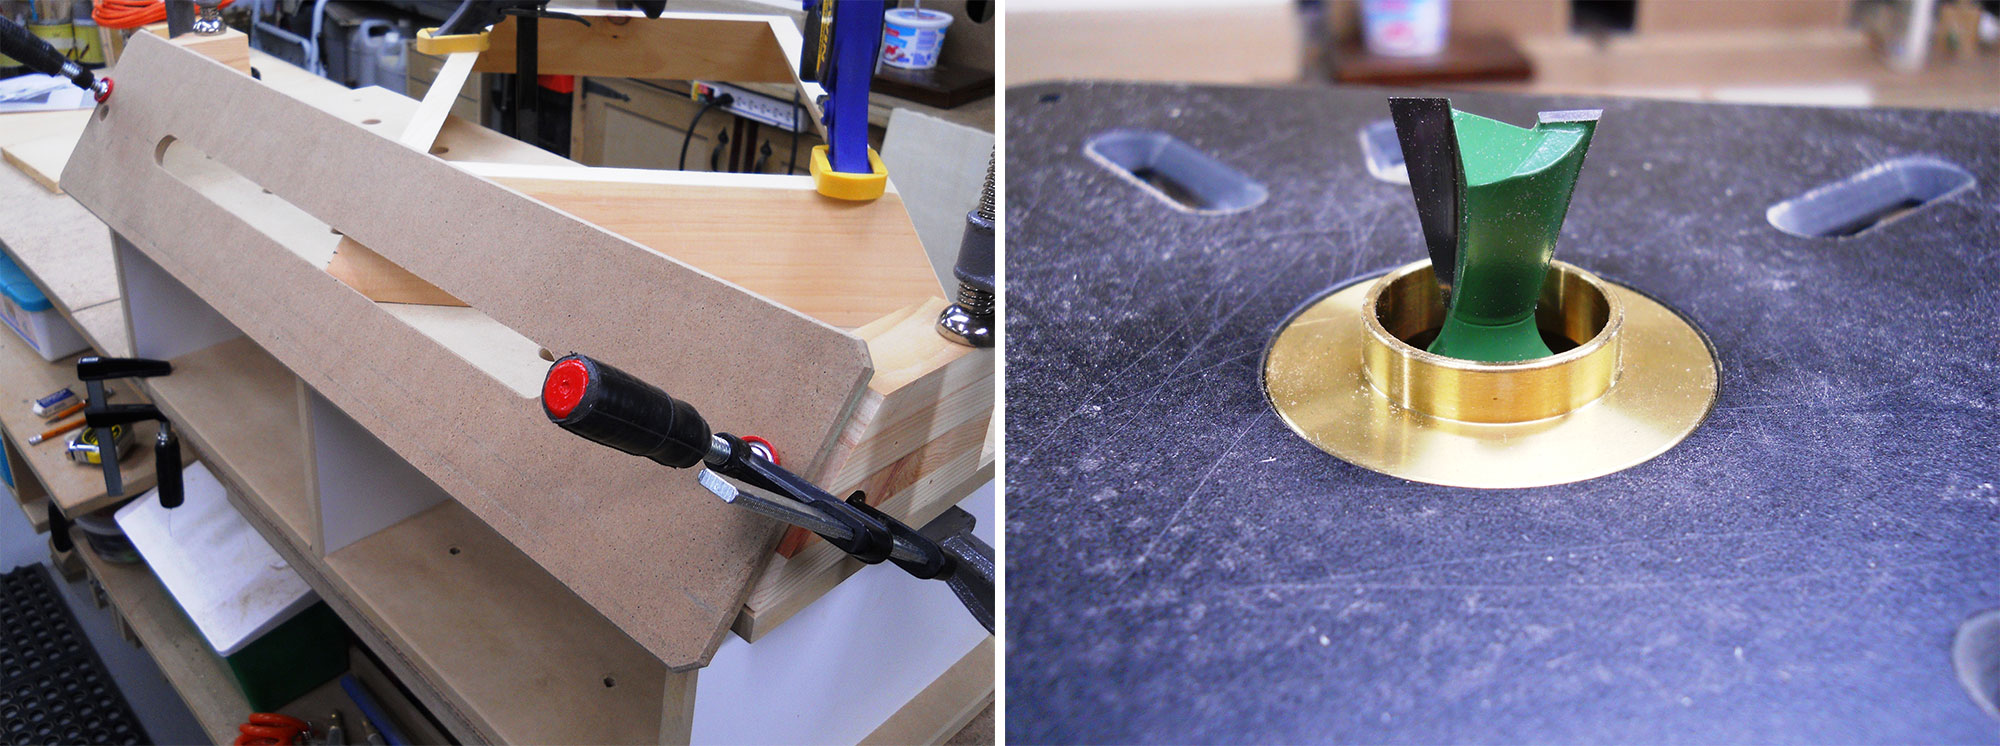 Image 1: Clamping router jig to work surface. Image 2: Dovetail bit and template guide installed in router.